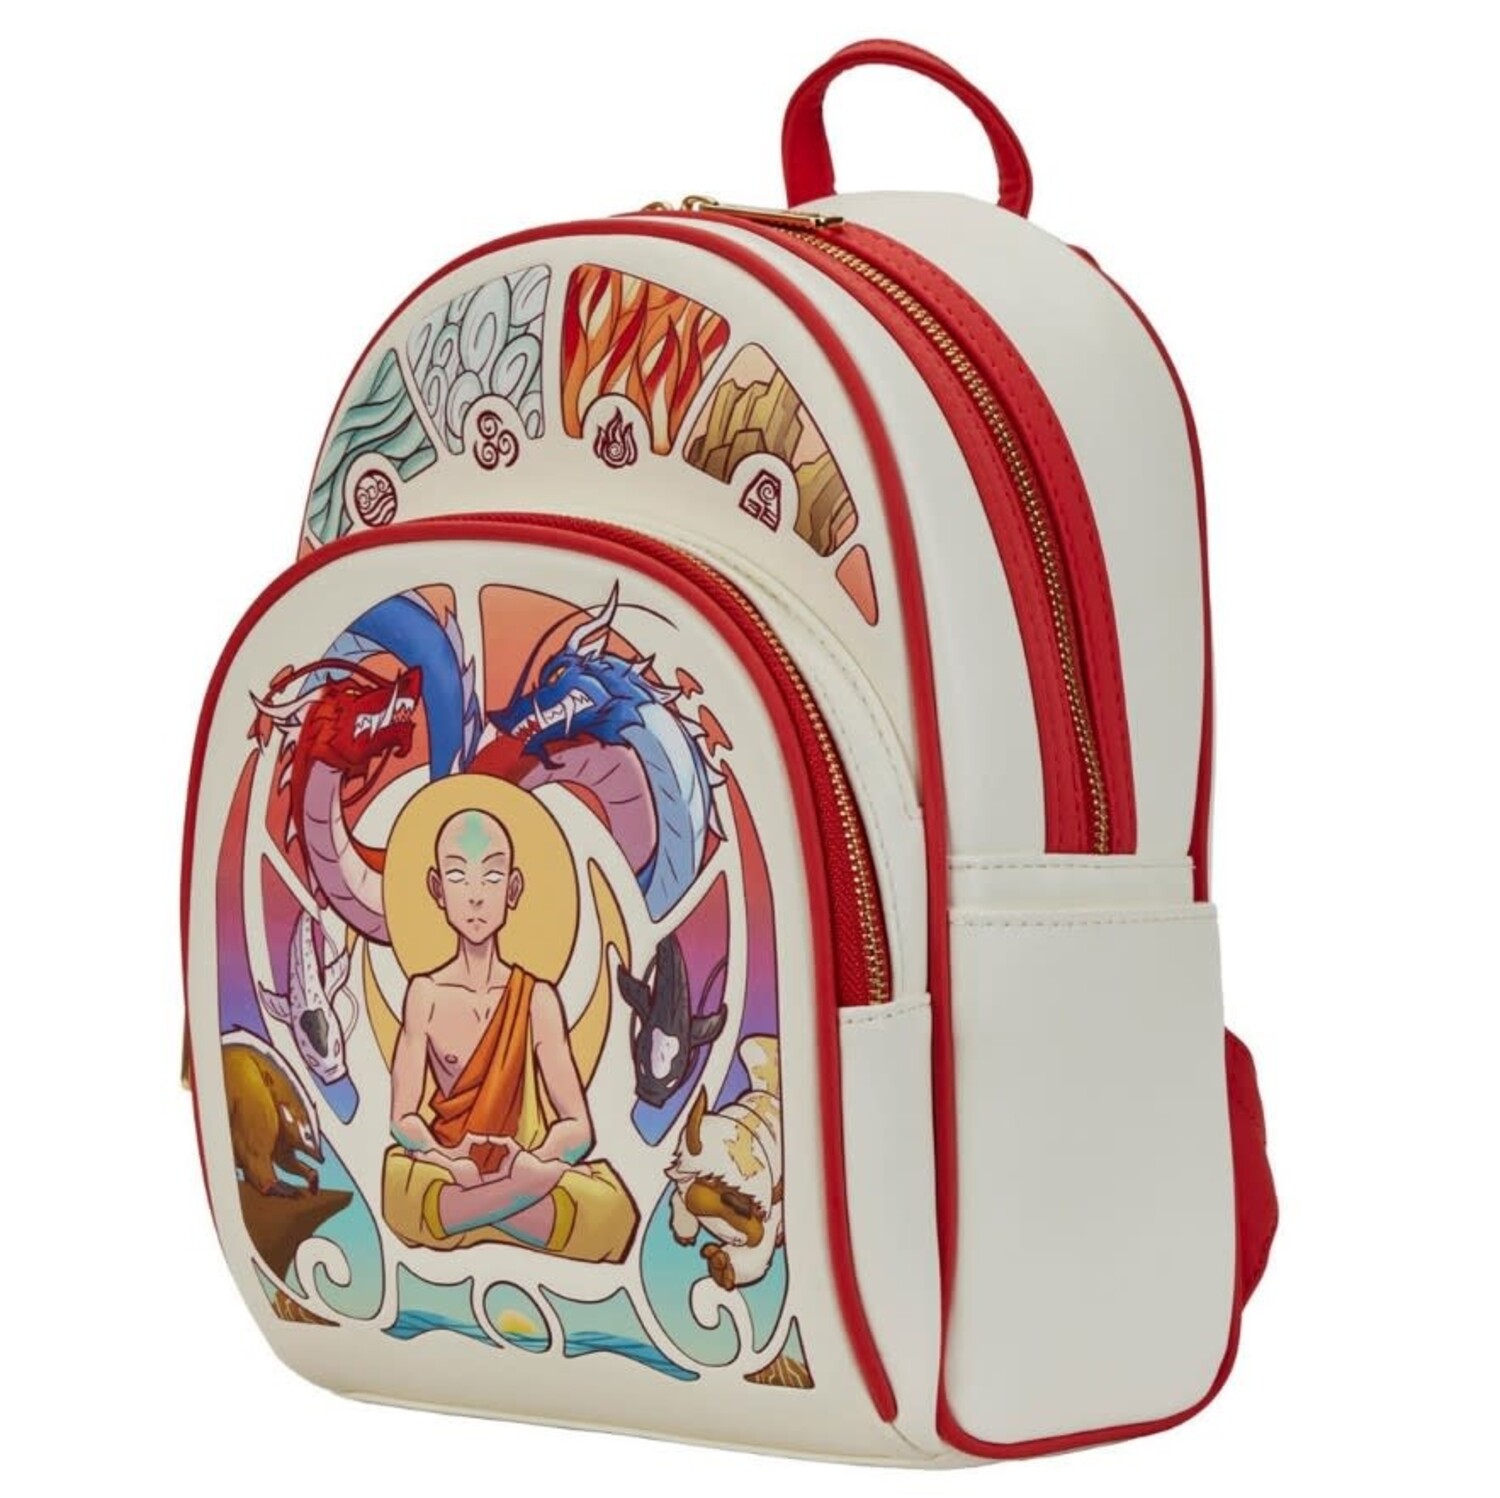 Loungefly The World of Avatar LightUp Backpack  shopDisney